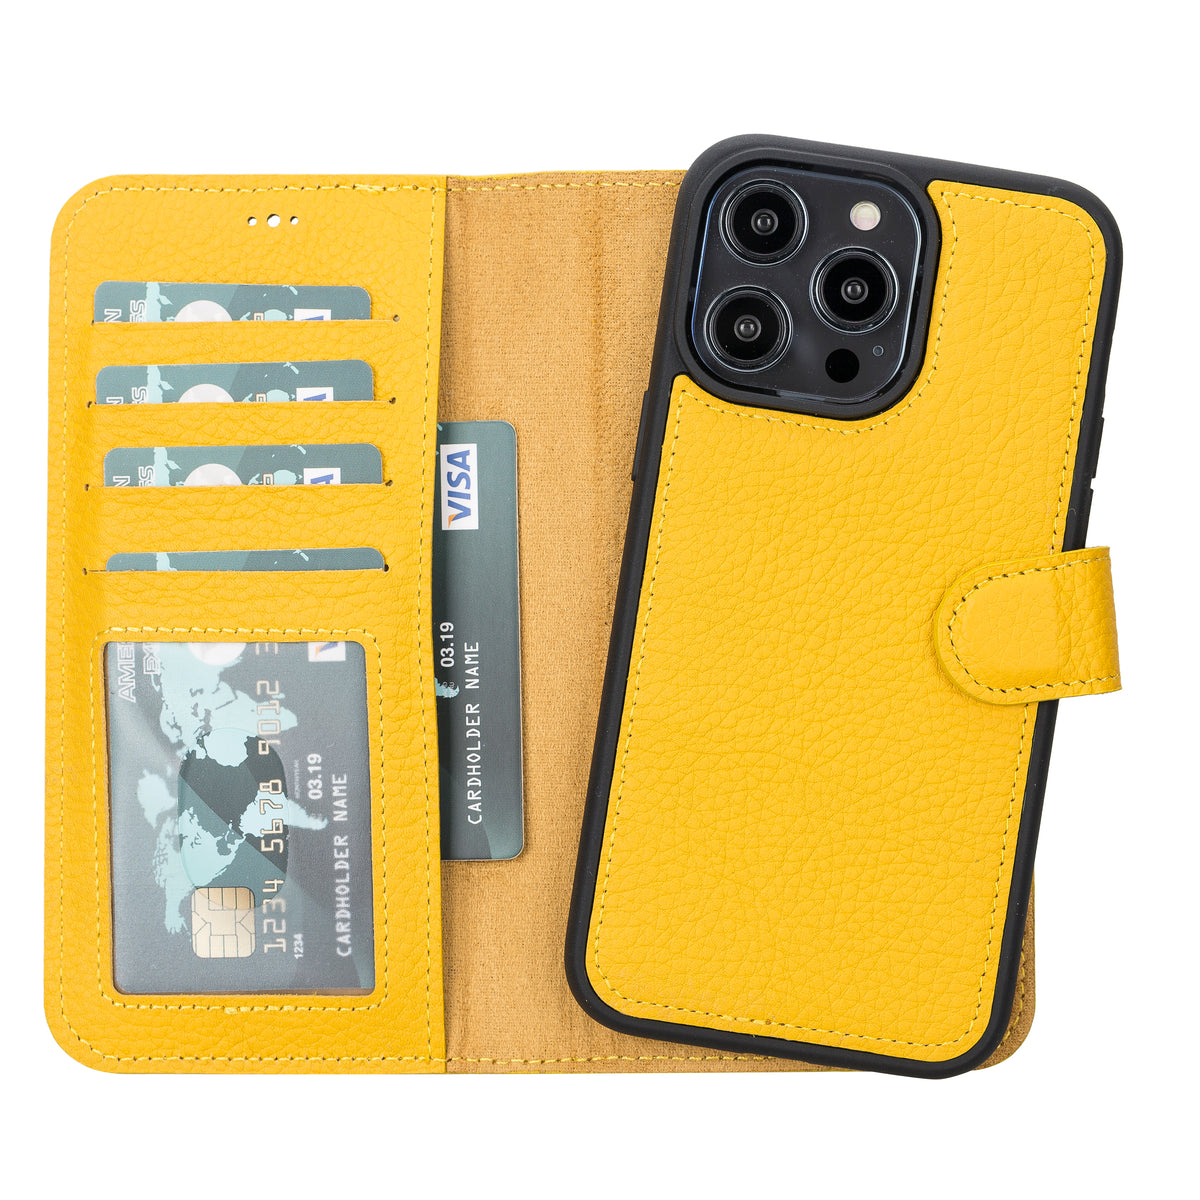 Wallet case for iPhone 13 promax  Wallet, Wallet case, Iphone cases